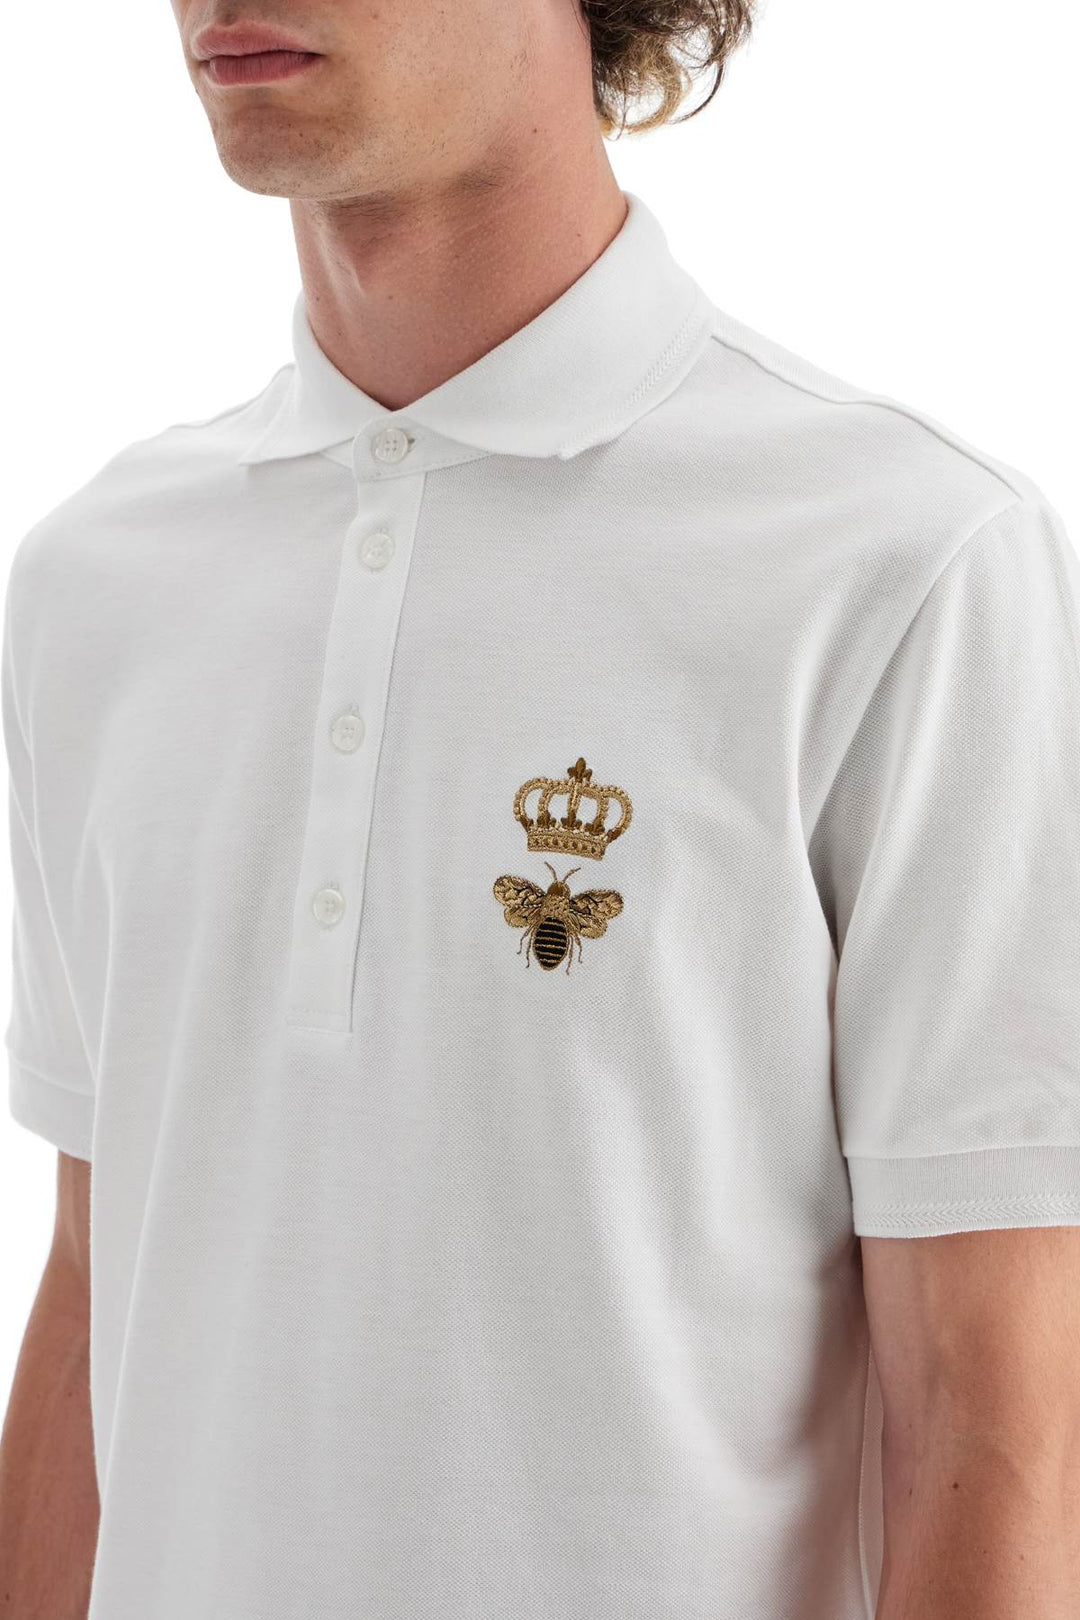 Dolce & Gabbana Slim Fit Polo Shirt With Embroidery   White